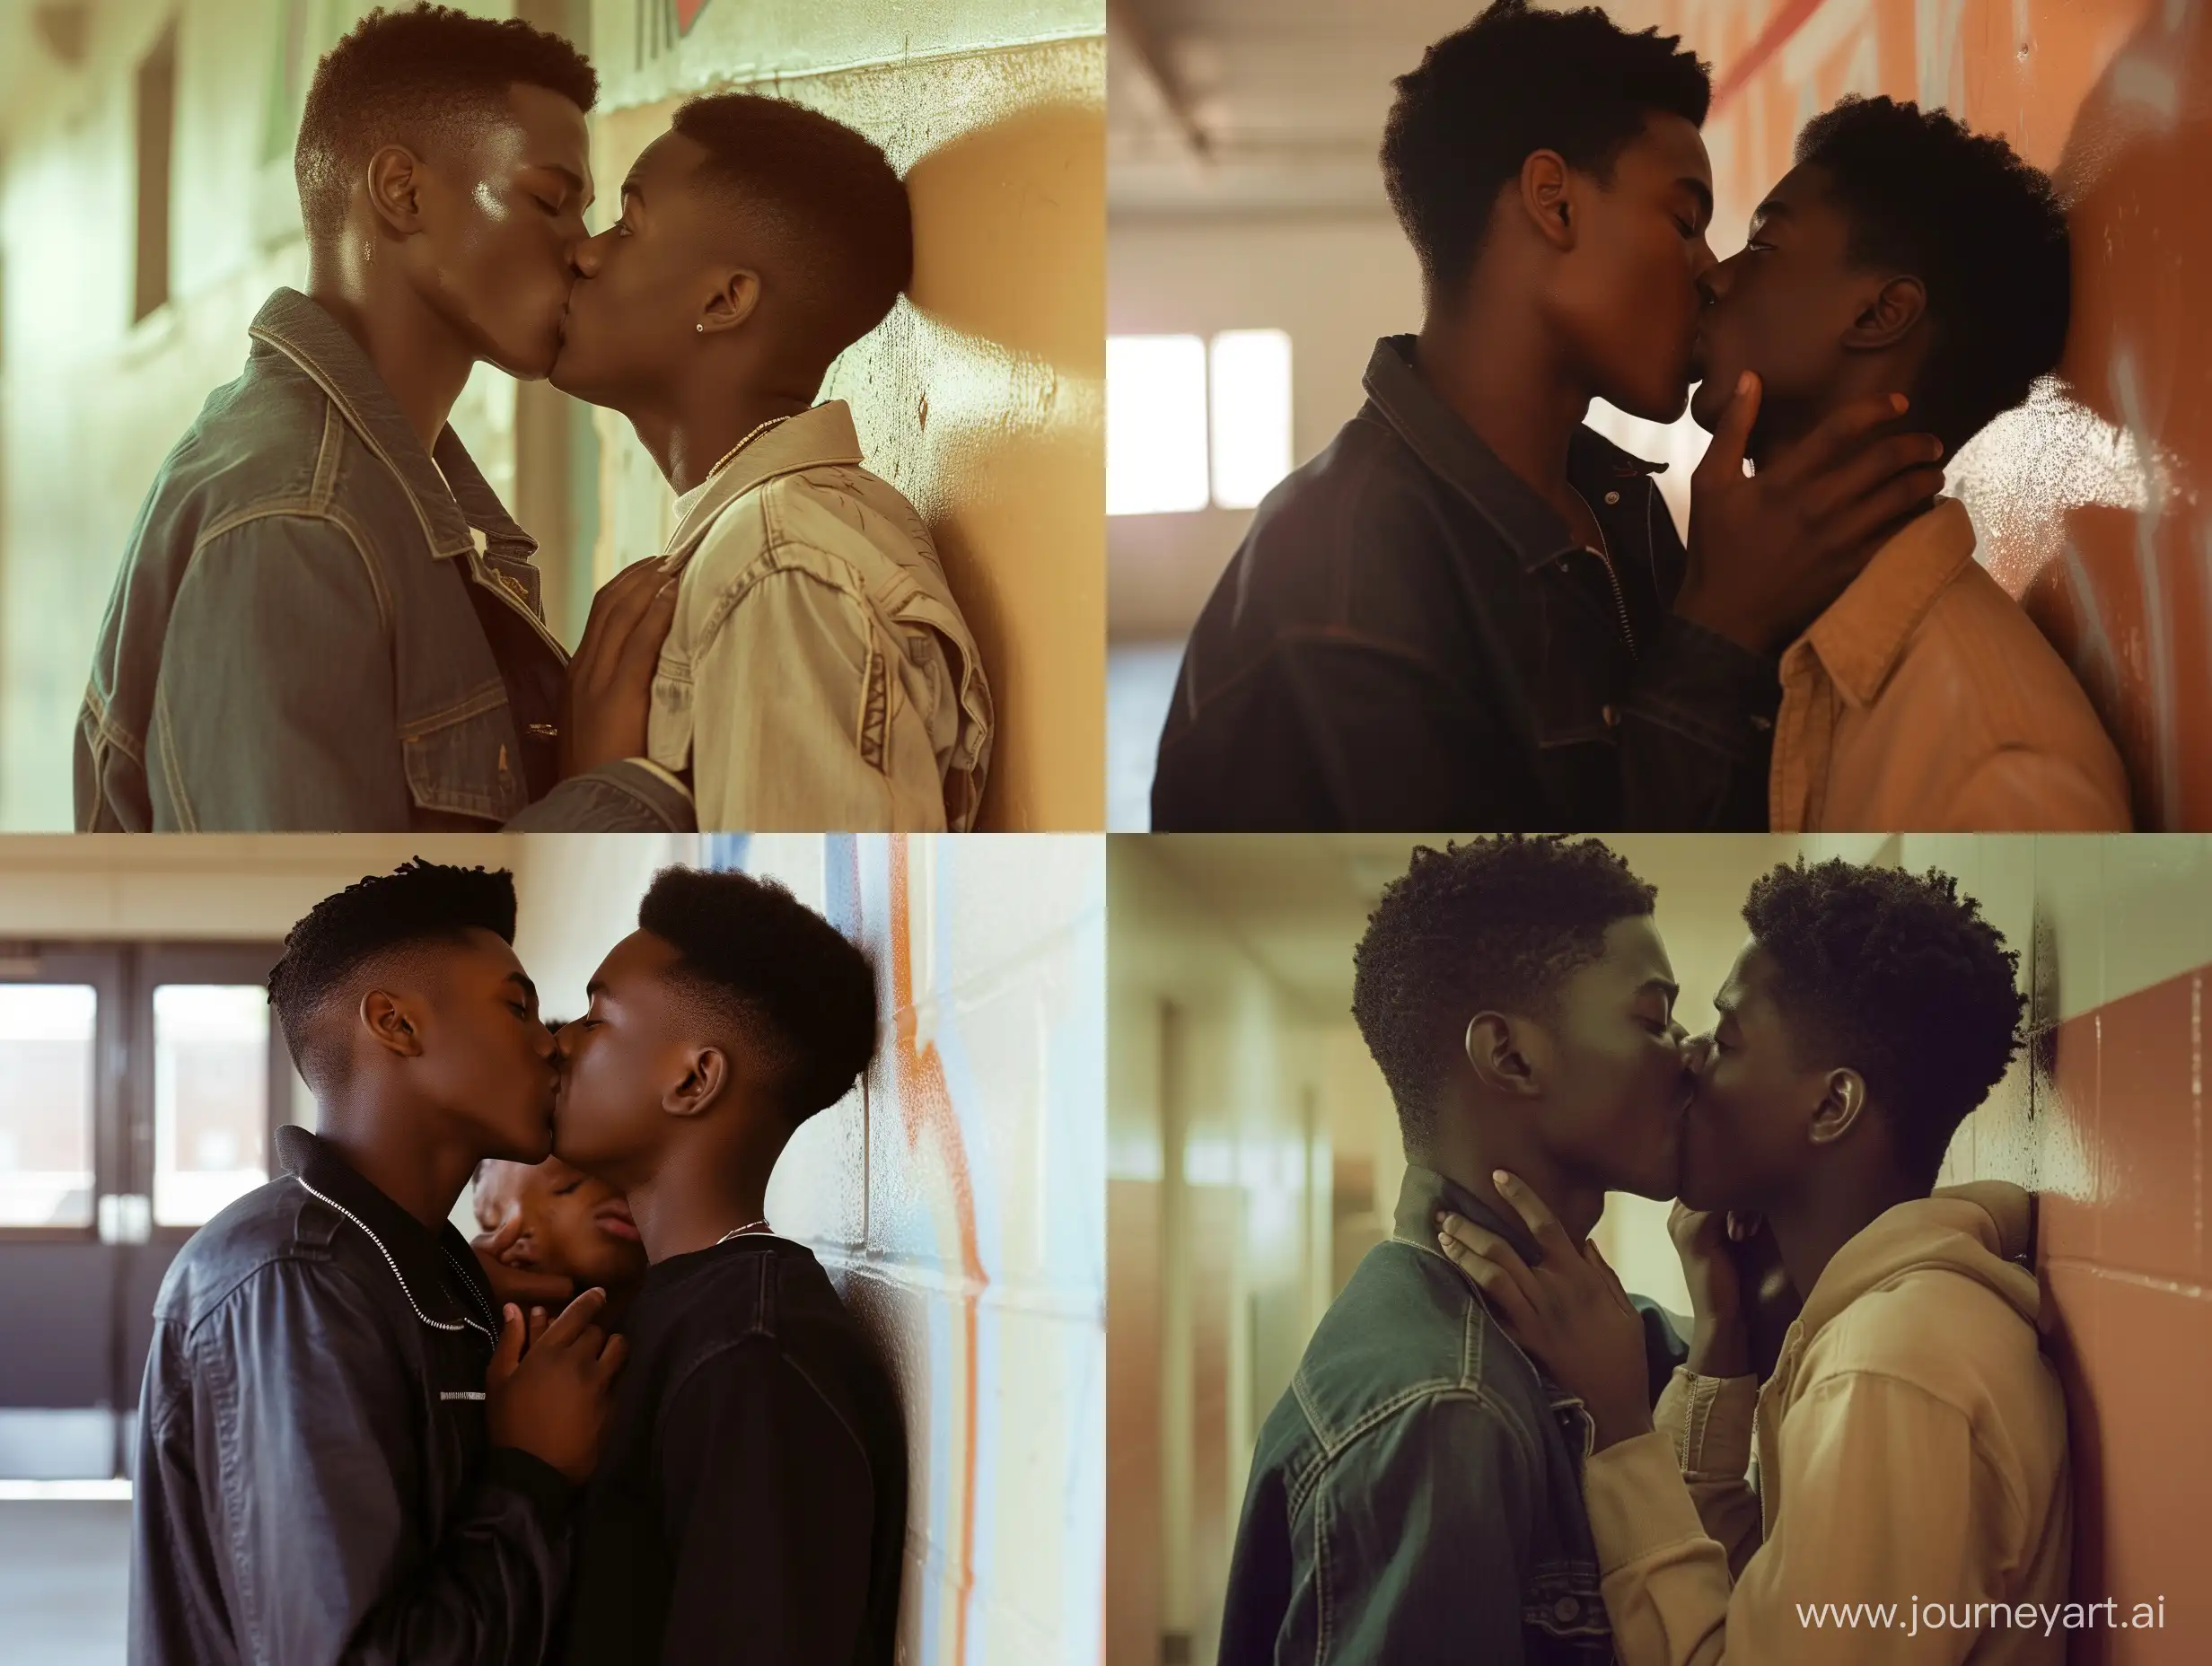 Intense-Romance-AfricanAmerican-Teenagers-Embrace-in-High-School-Setting